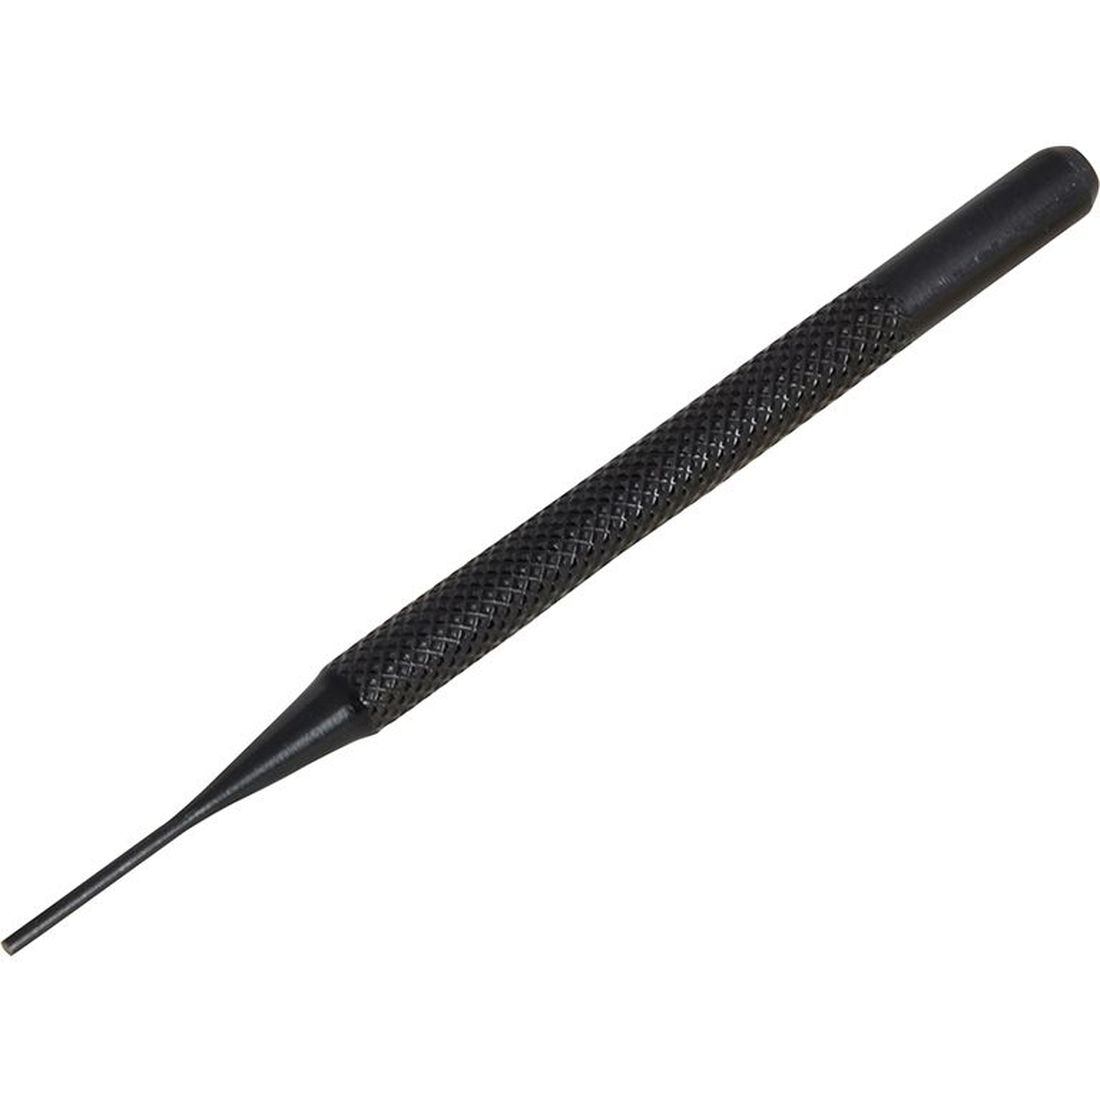 Faithfull Round Head Parallel Pin Punch 1.5mm (1/16in)                                    